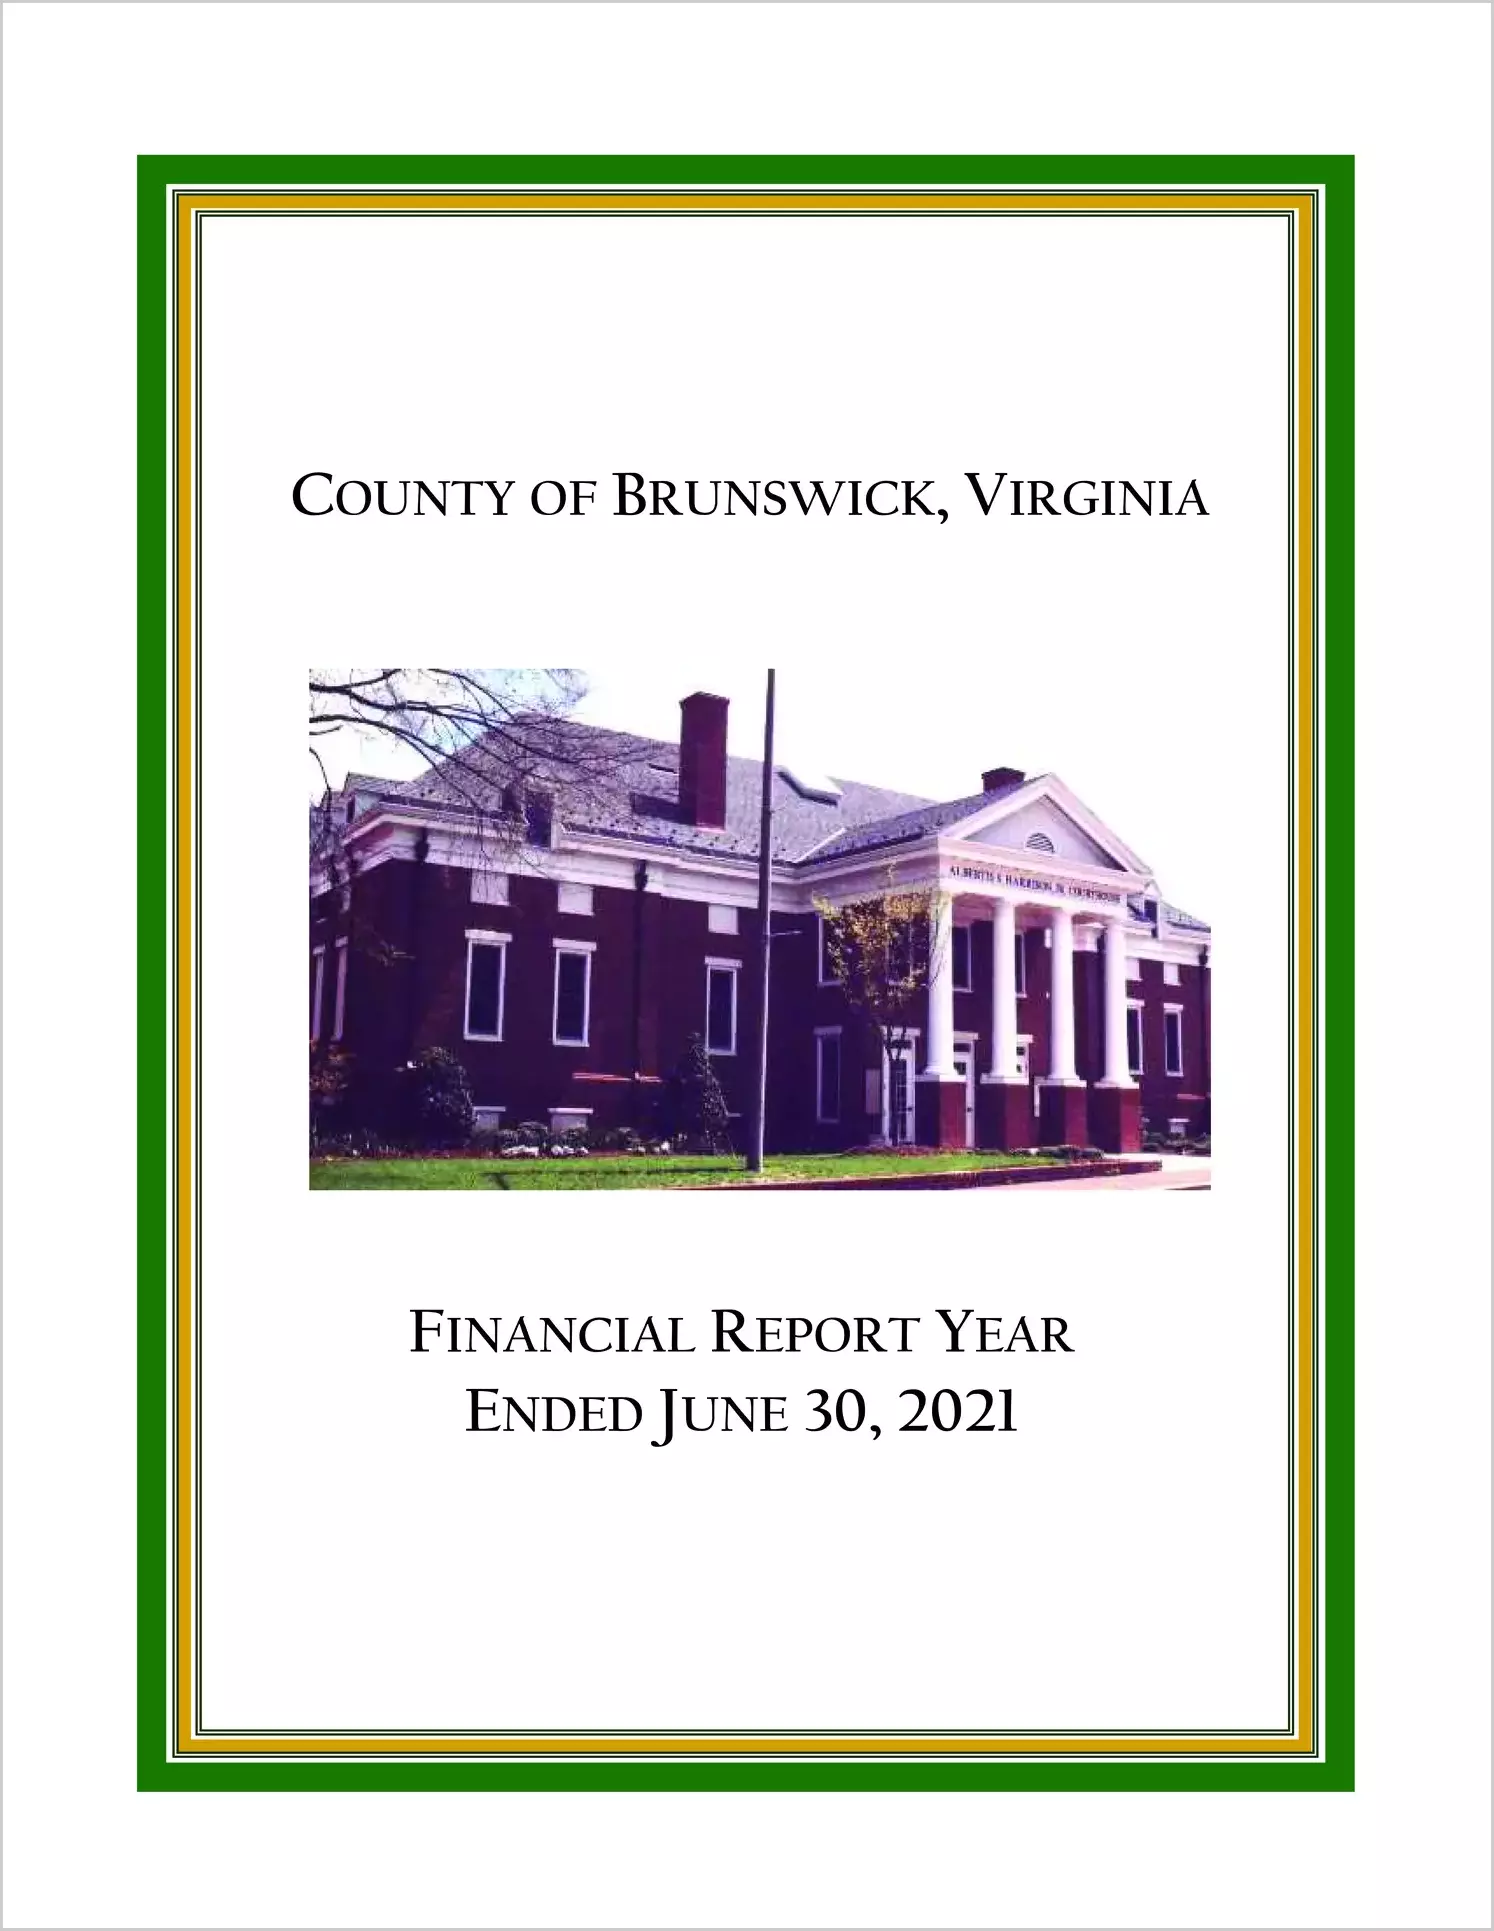 2021 Annual Financial Report for County of Brunswick